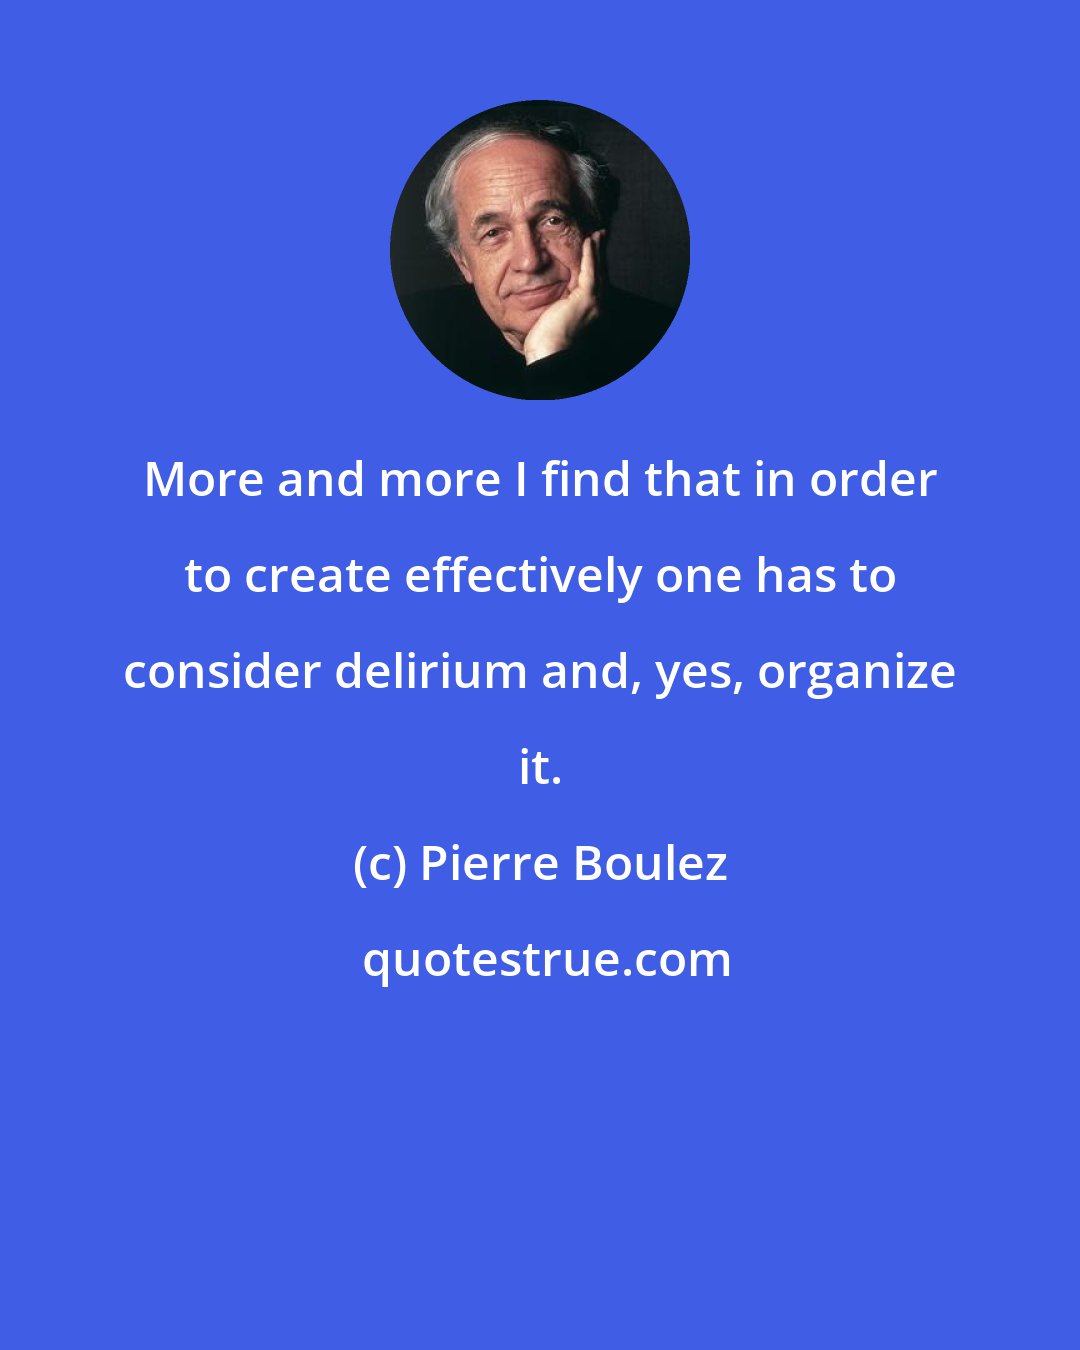 Pierre Boulez: More and more I find that in order to create effectively one has to consider delirium and, yes, organize it.